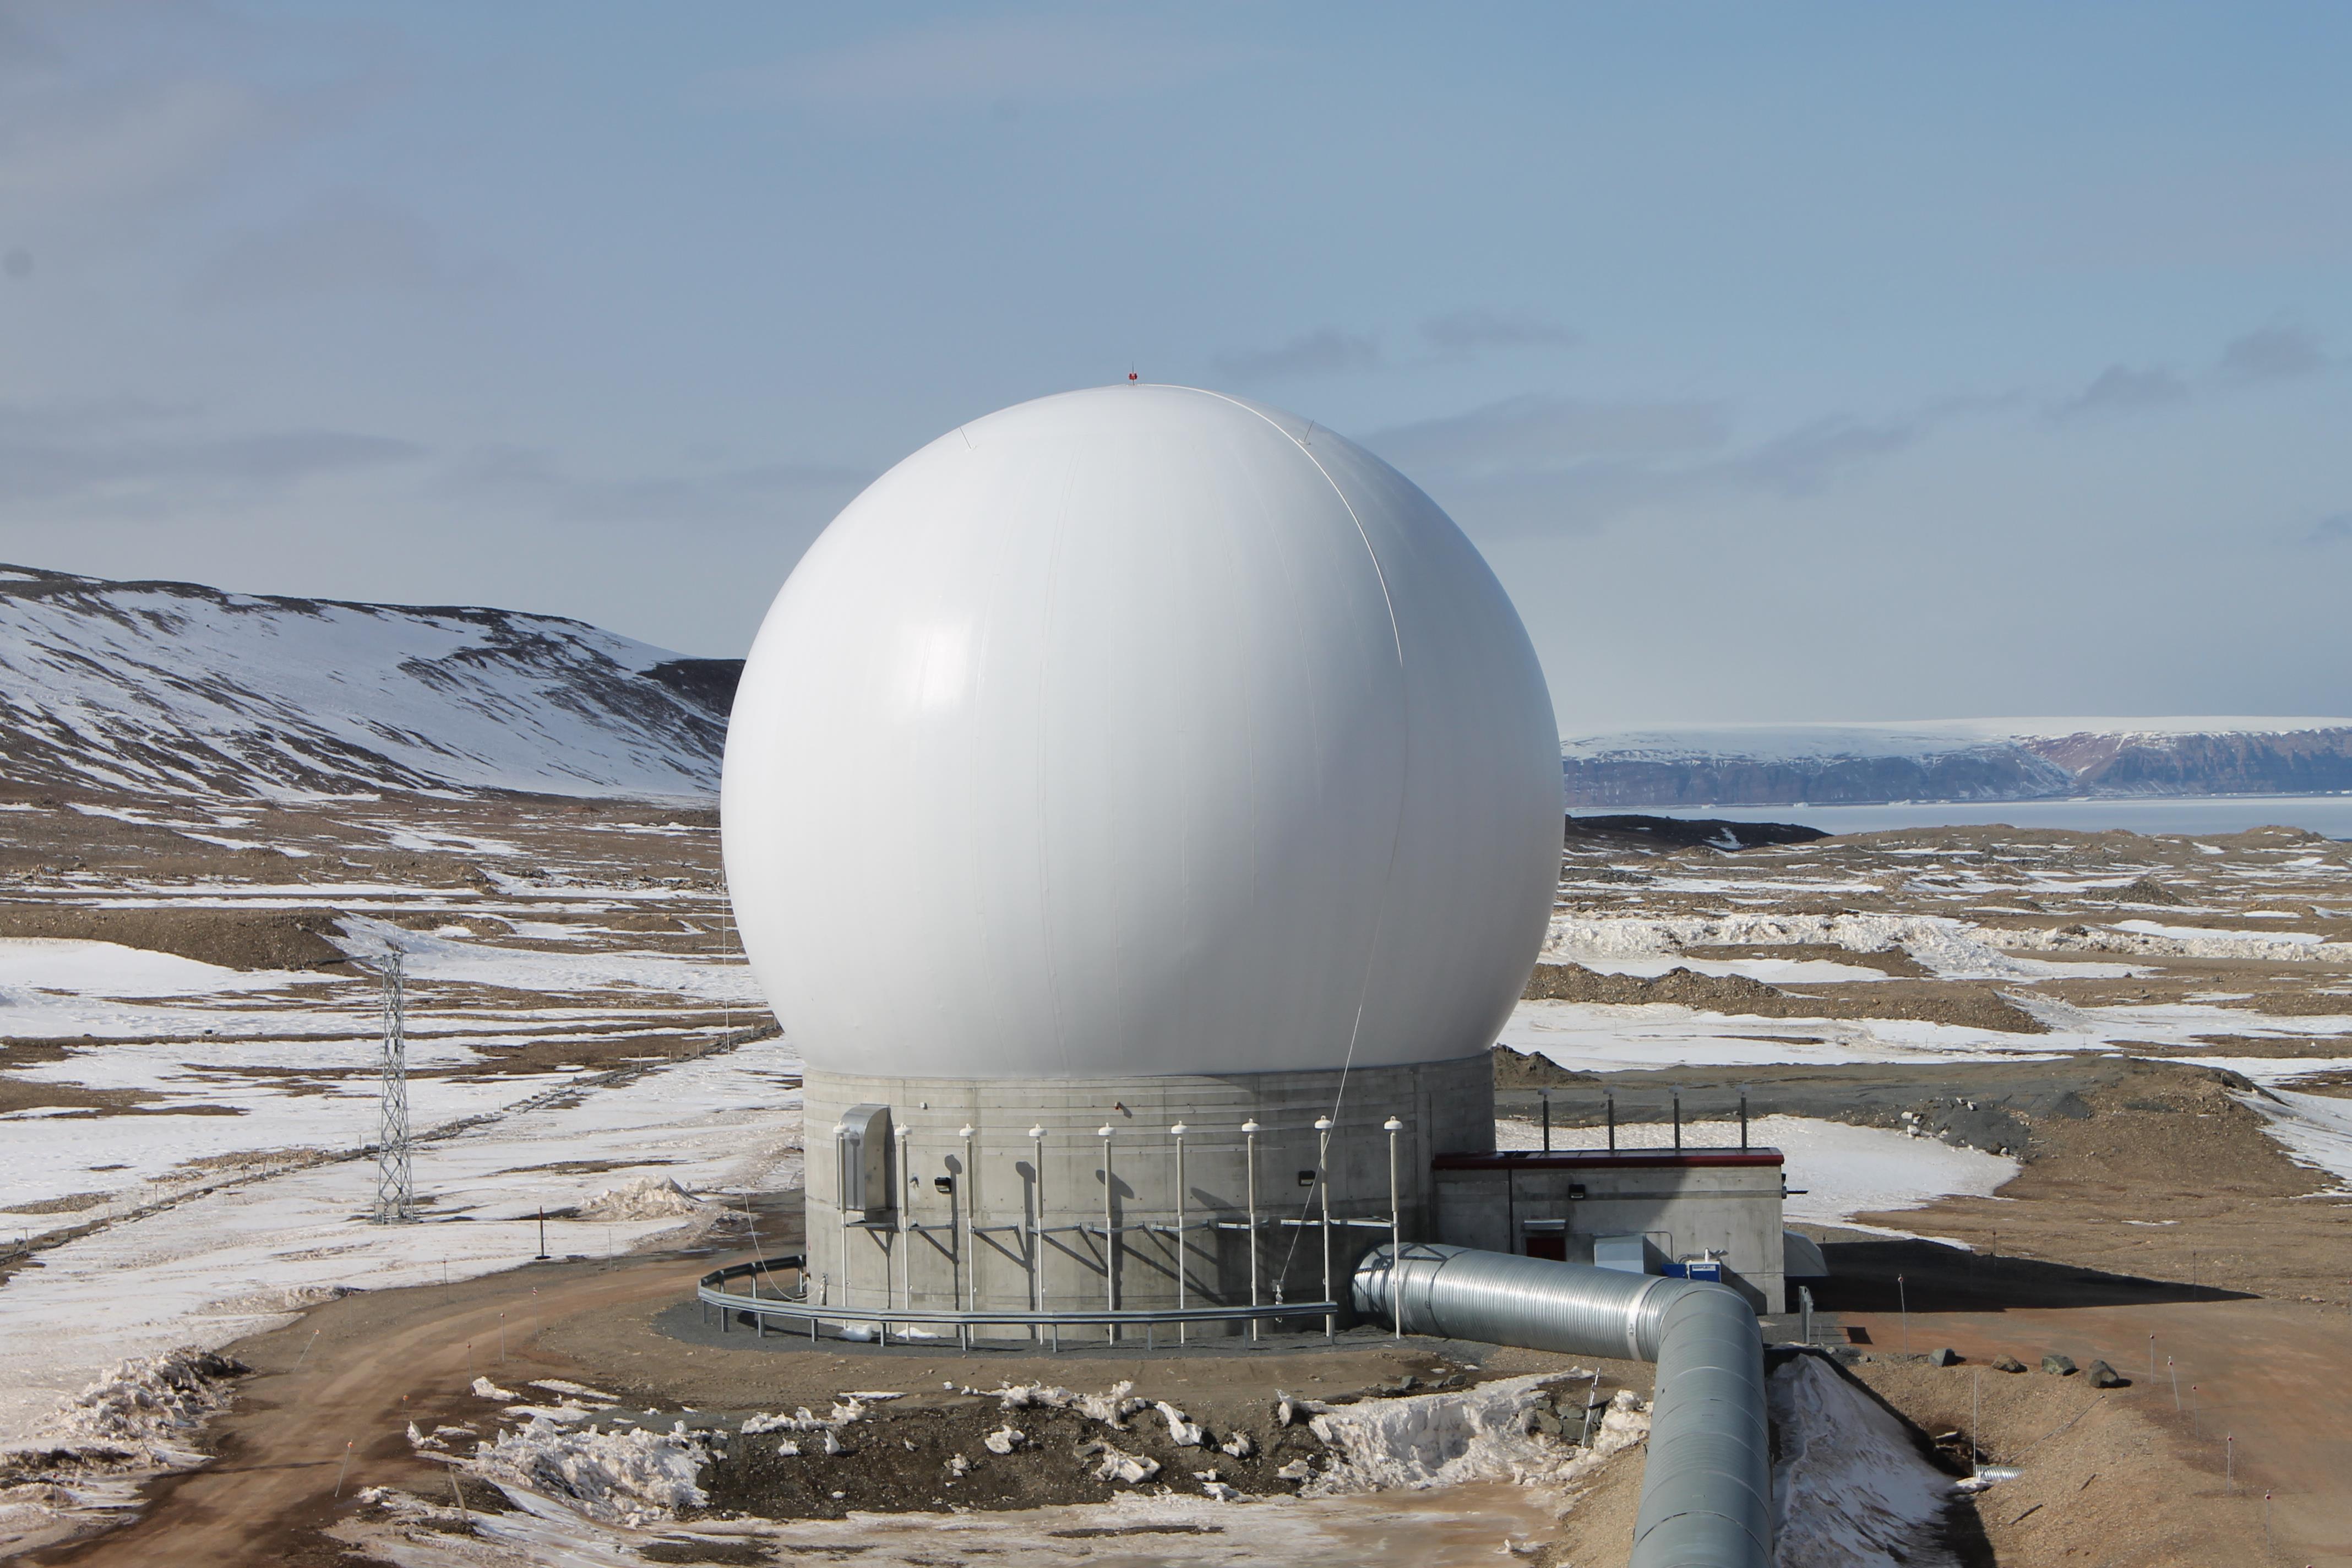 Detachment 1, 23rd Space Operations Squadron gained operational acceptance of the seventh and final Remote Block Change antenna at Thule Air Base, Greenland, on July, 26, 2016. The antenna, designated as POGO-Charlie, represented some of the latest telemetry, tracking and command technologies in the U.S. Air Force. (U.S. Air Force)